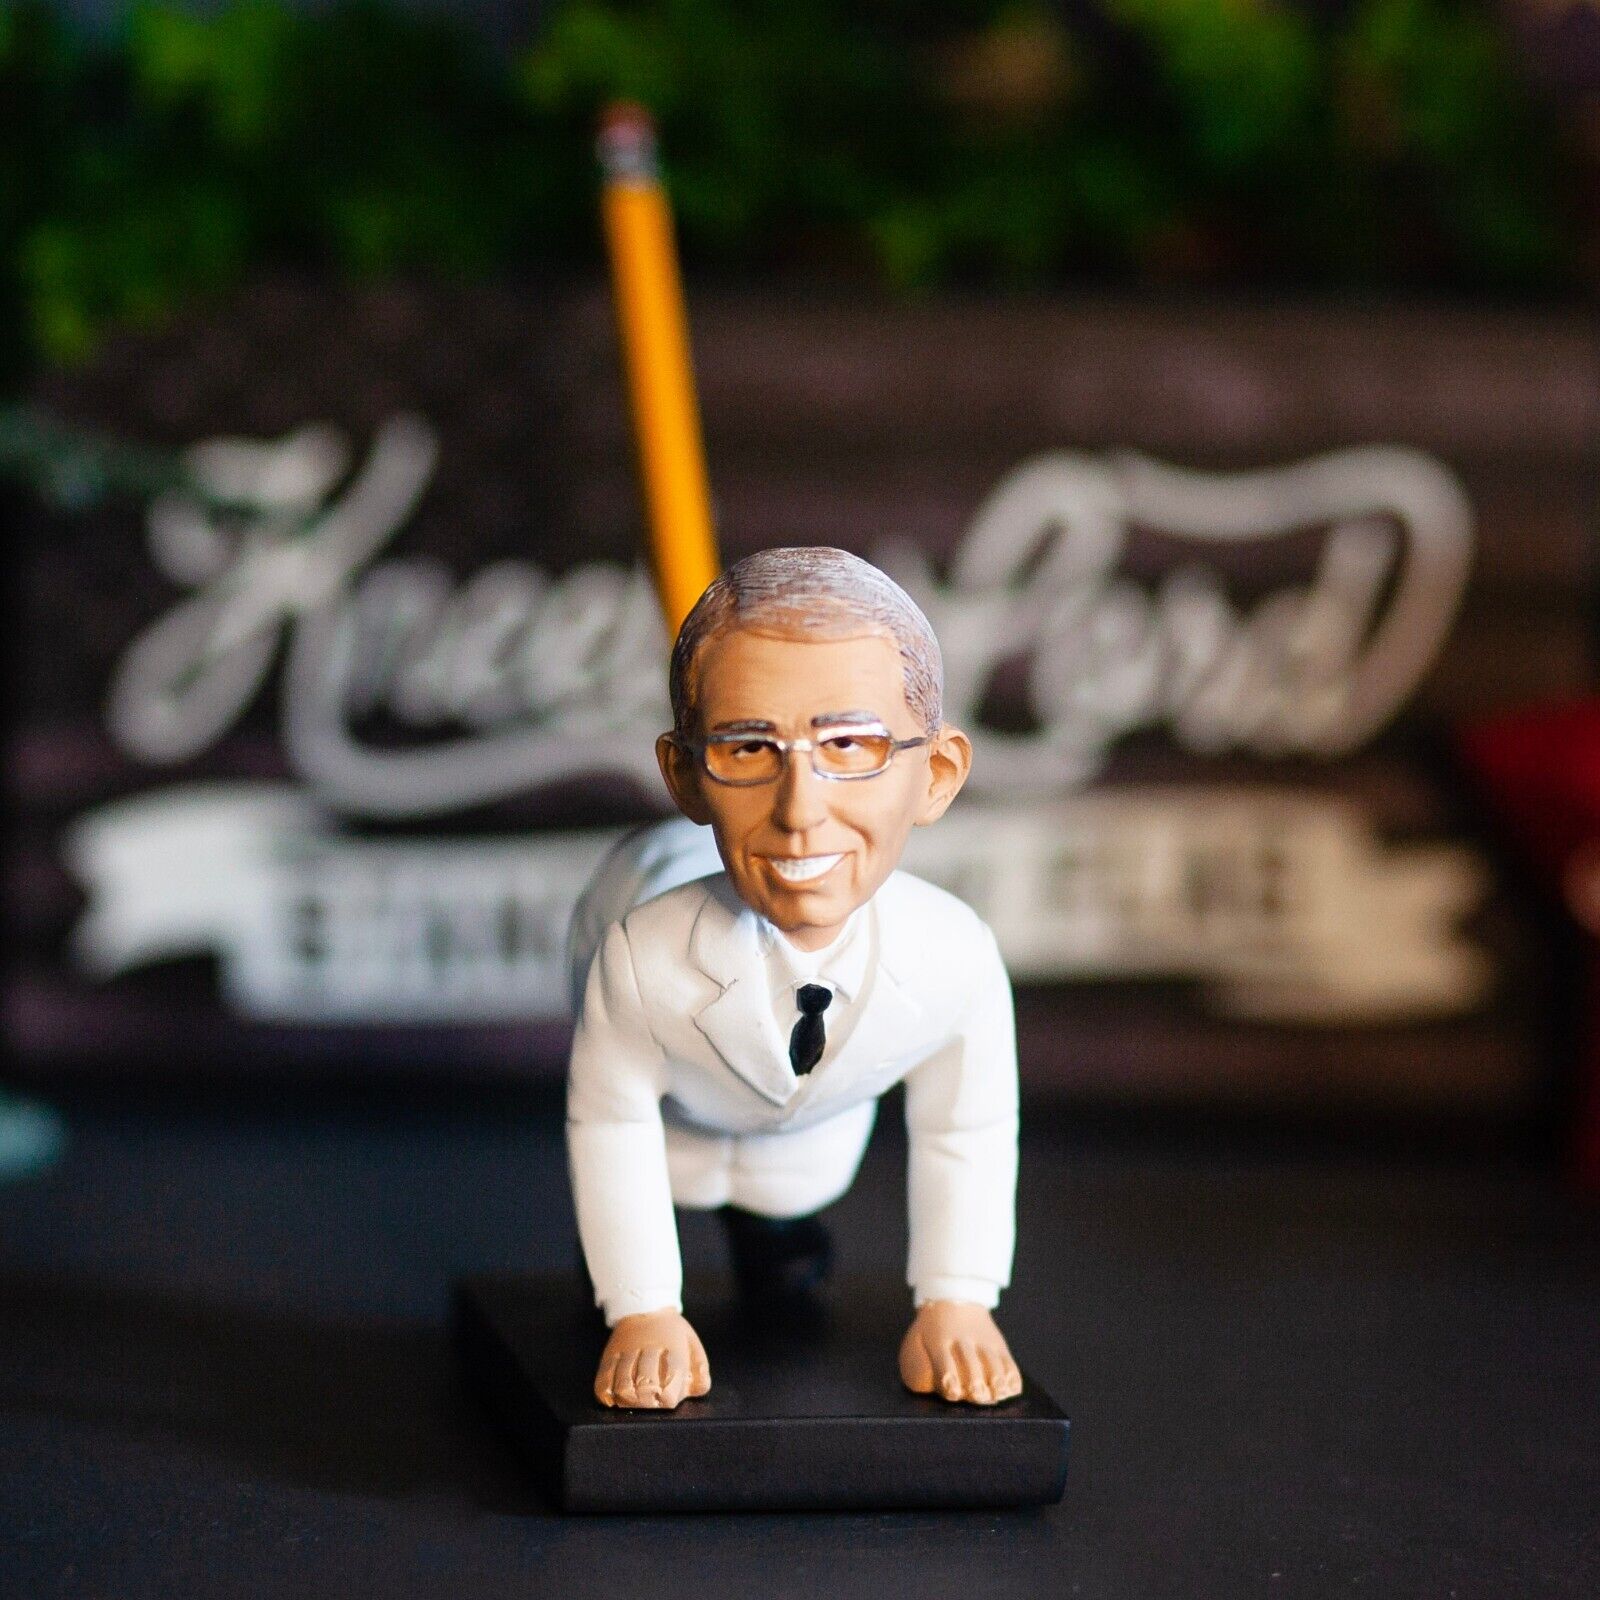 Funny Dr. Fauci Pen Holder Bobblehead Gag Gift | Collectible Tony Fauci Figurine